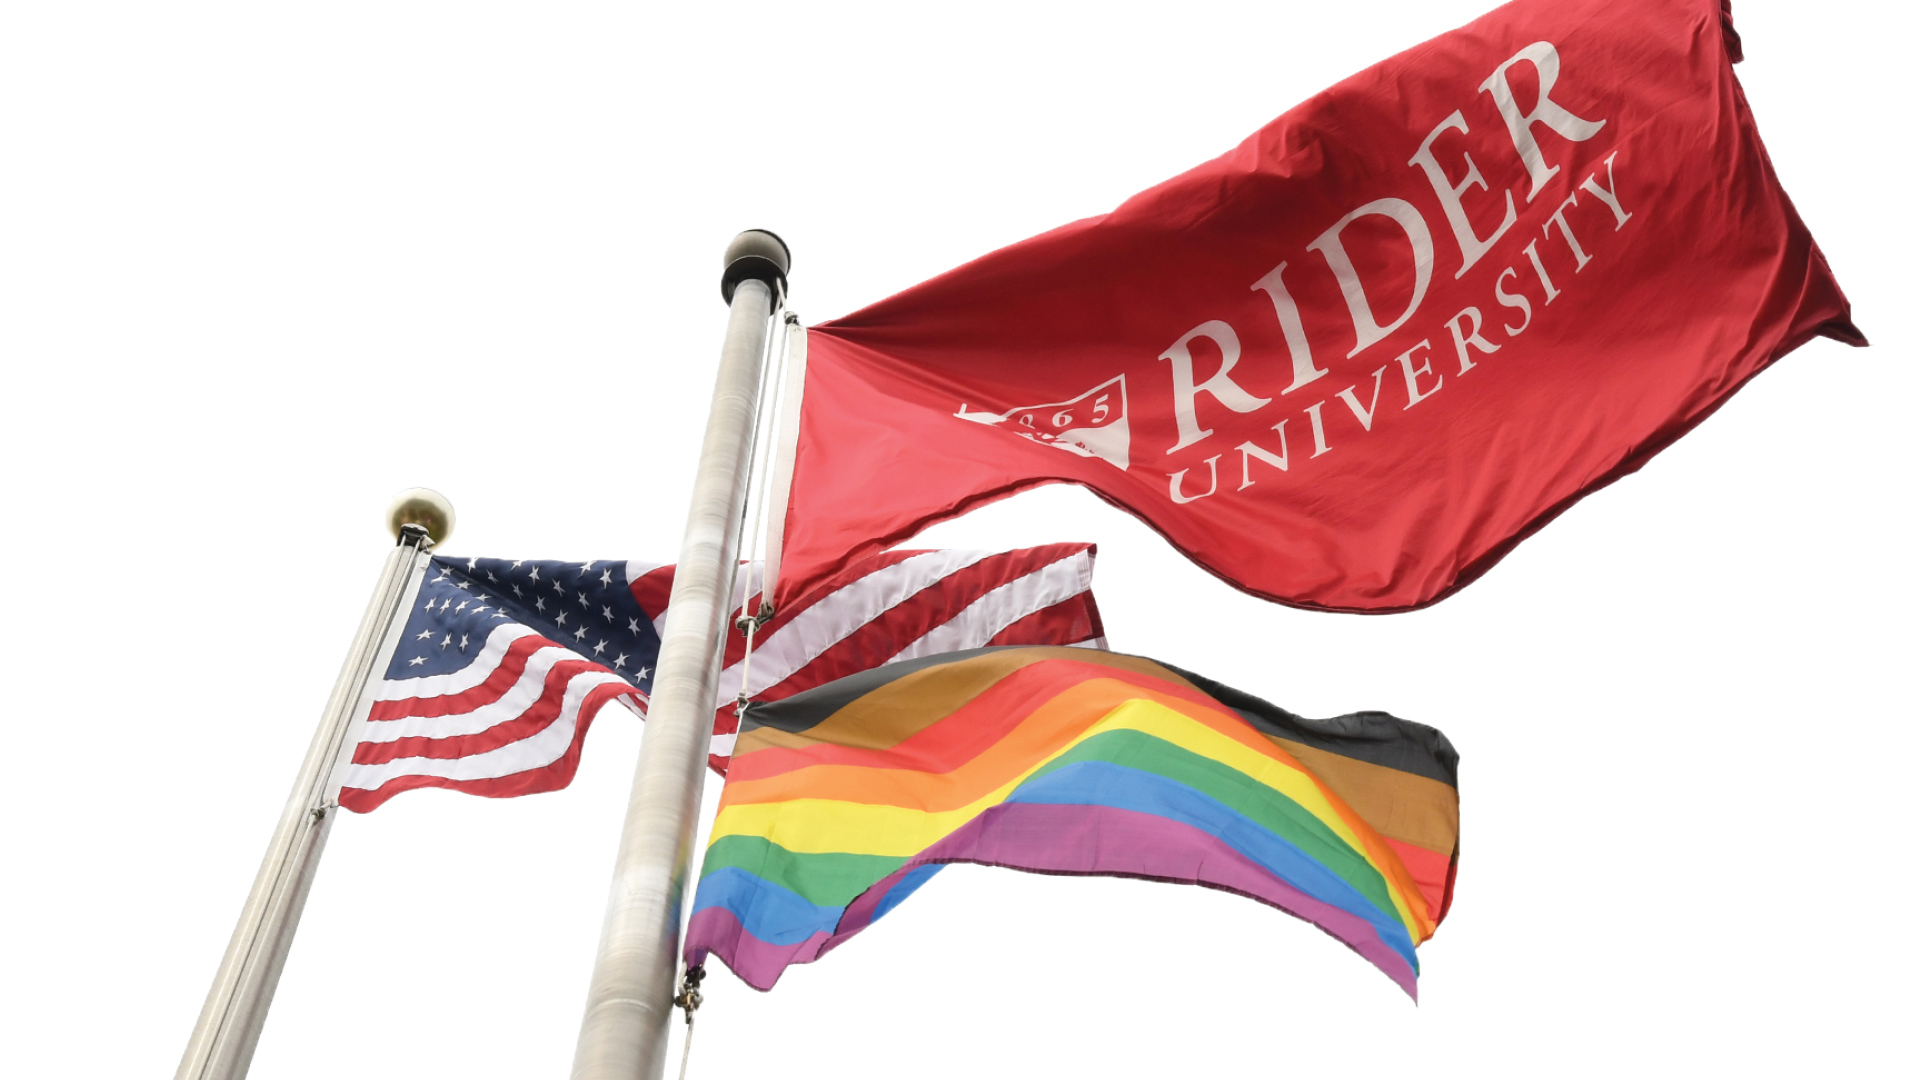 Rider flag and pride flag